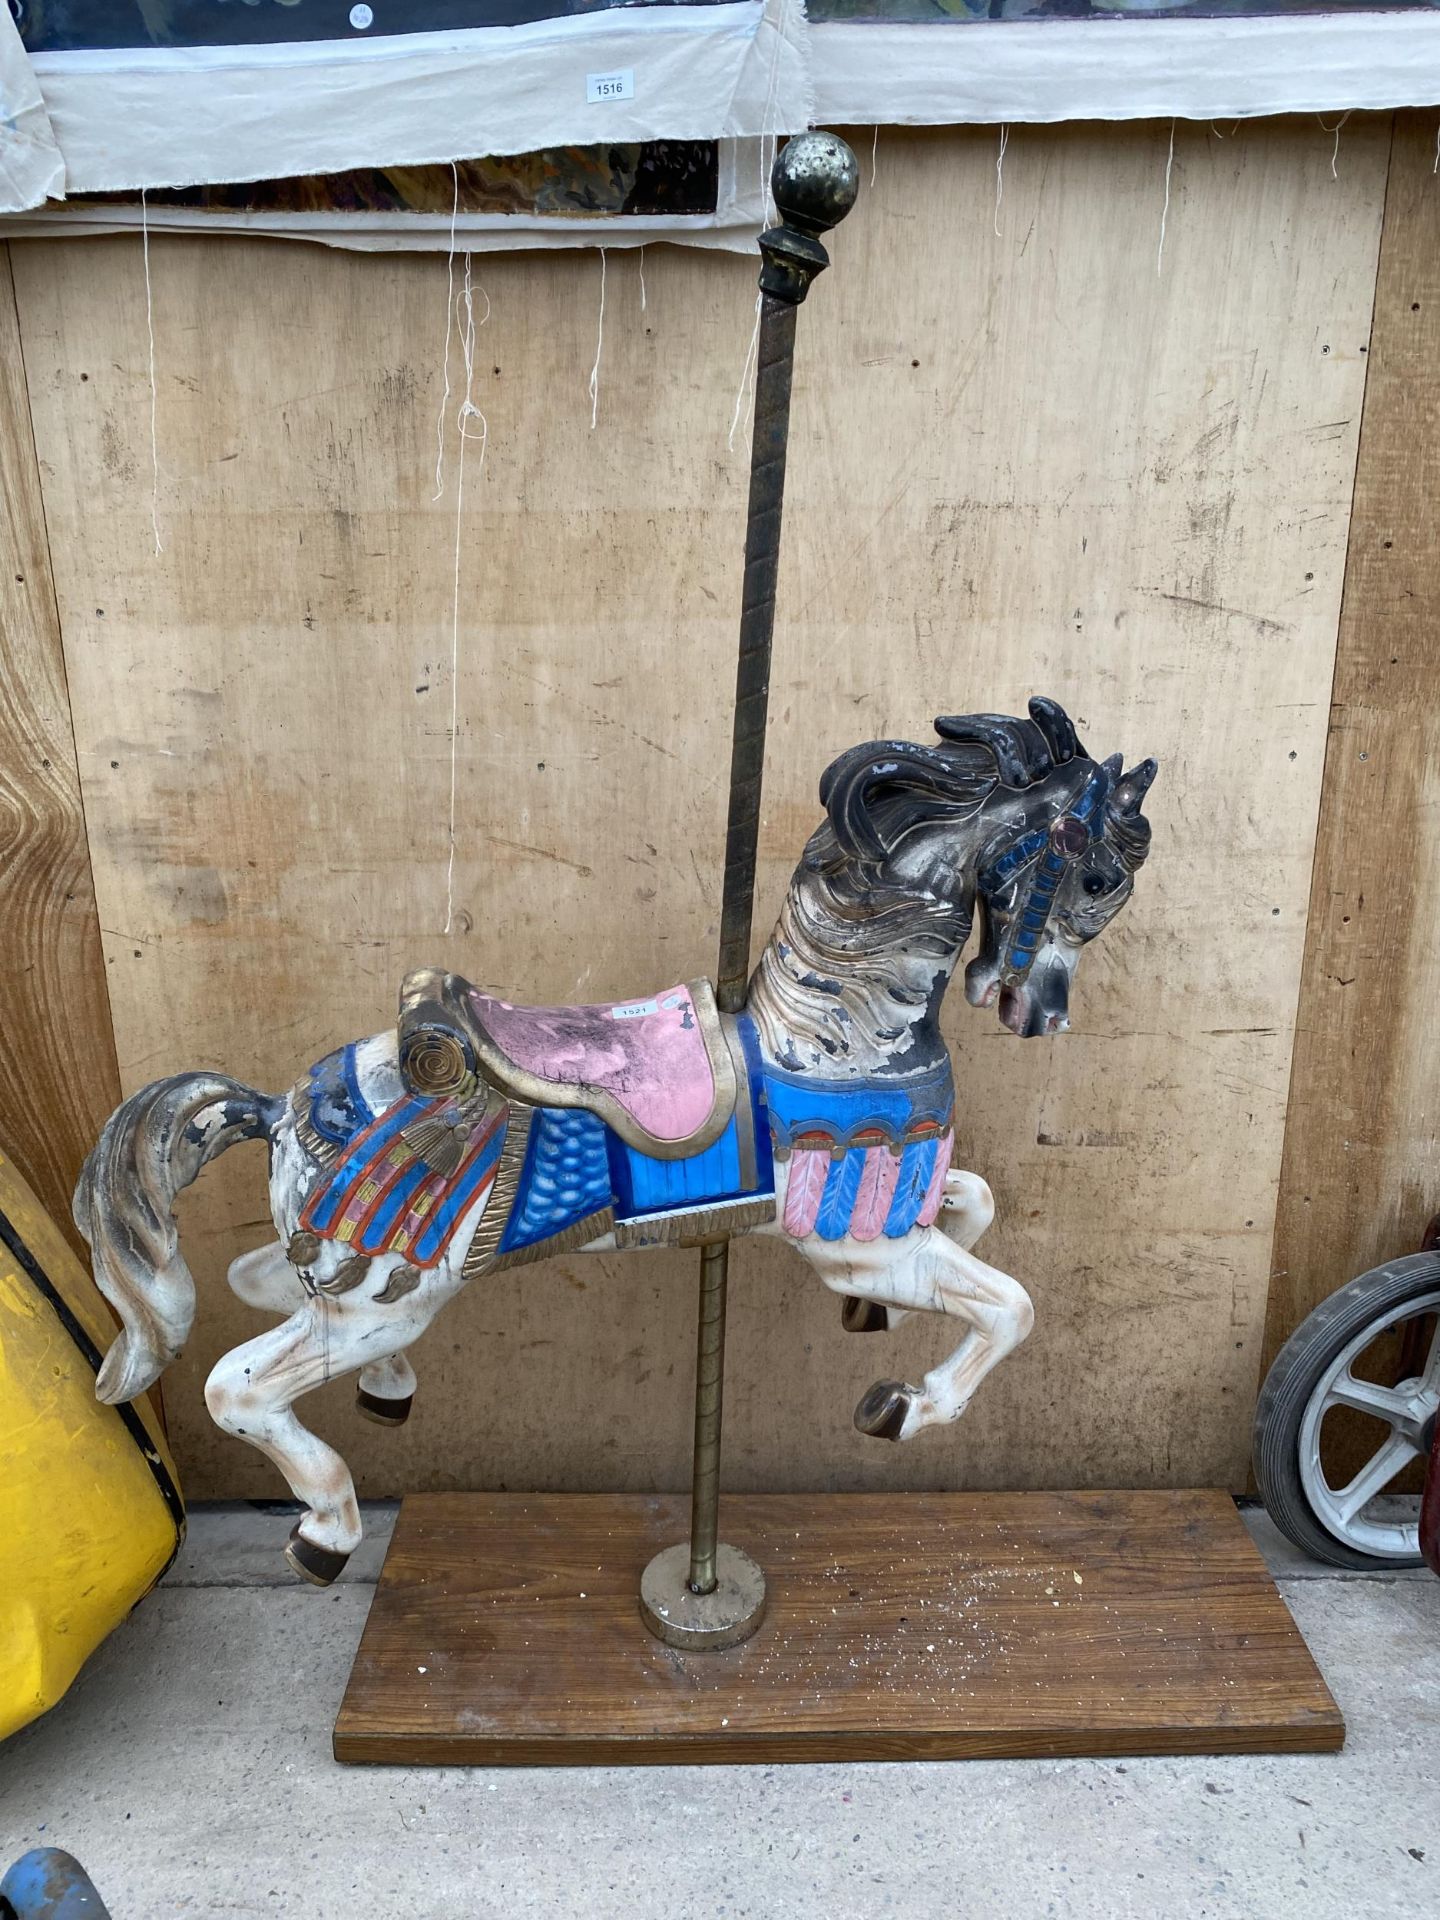 A VINTAGE CAROUSEL HORSE FAIRGROUND RIDE MOUNTED ON A WOODEN PLINTH